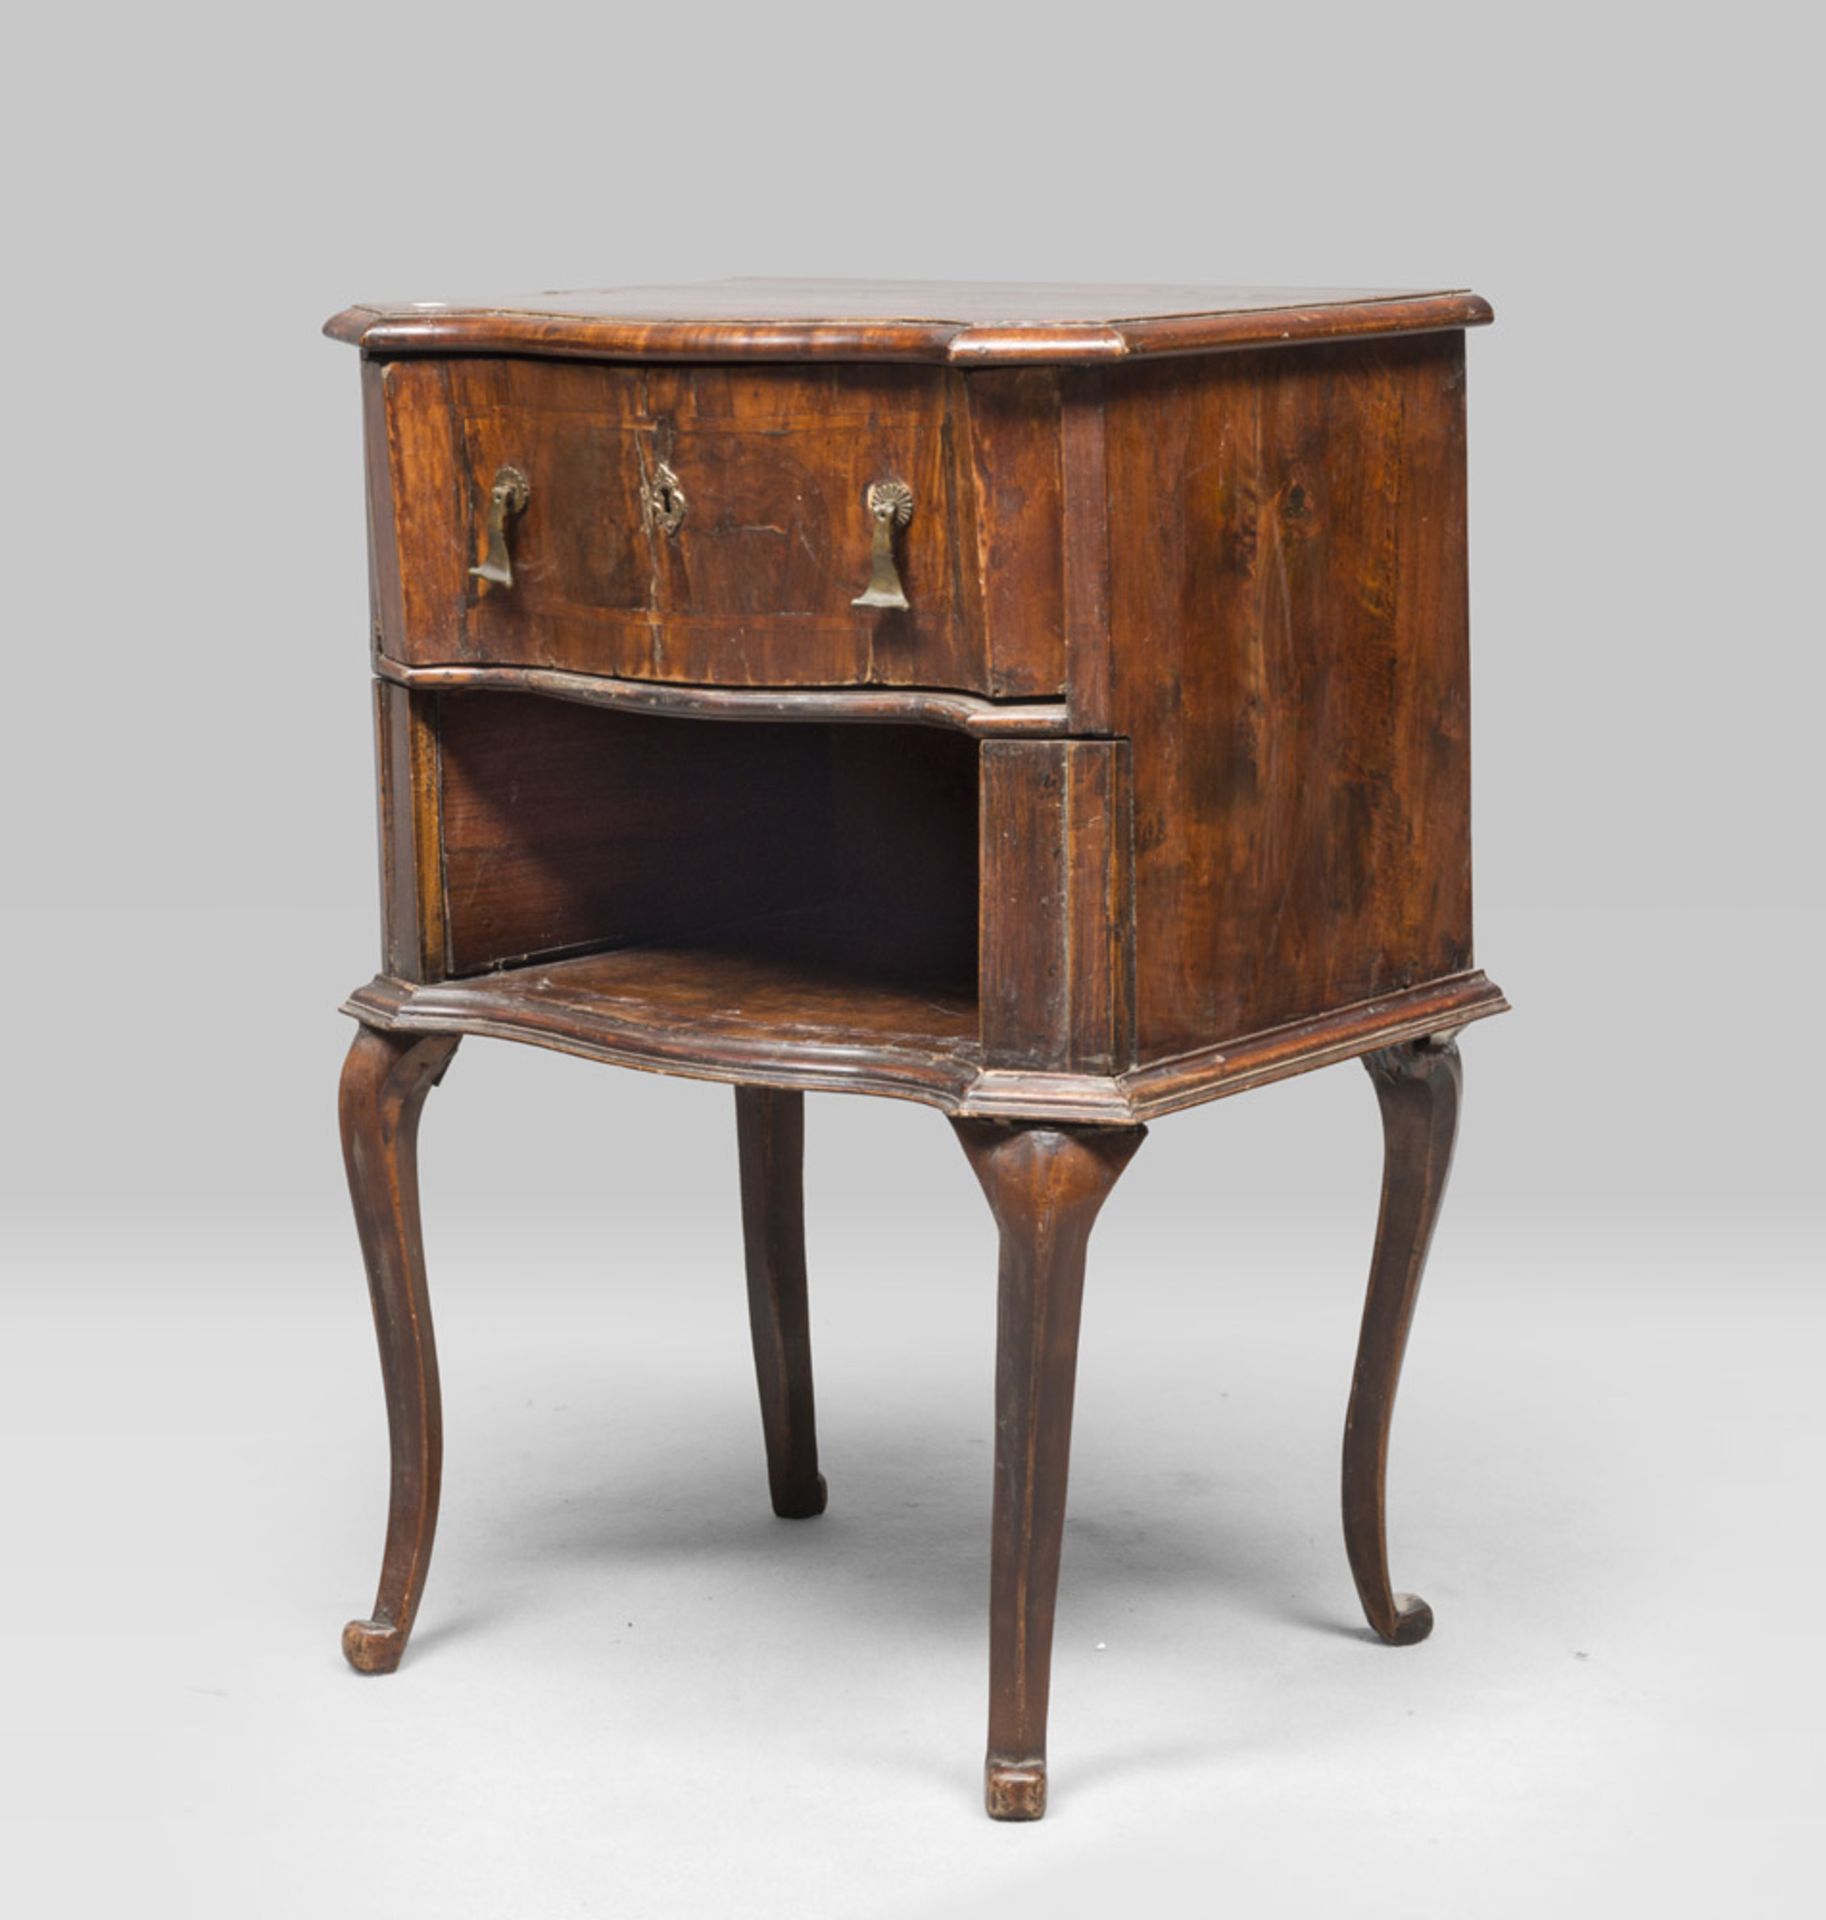 RESTS OF WALNUT BEDSIDE, VENICE 18TH CENTURY with reserves in boxwood. Moved front with dummy side